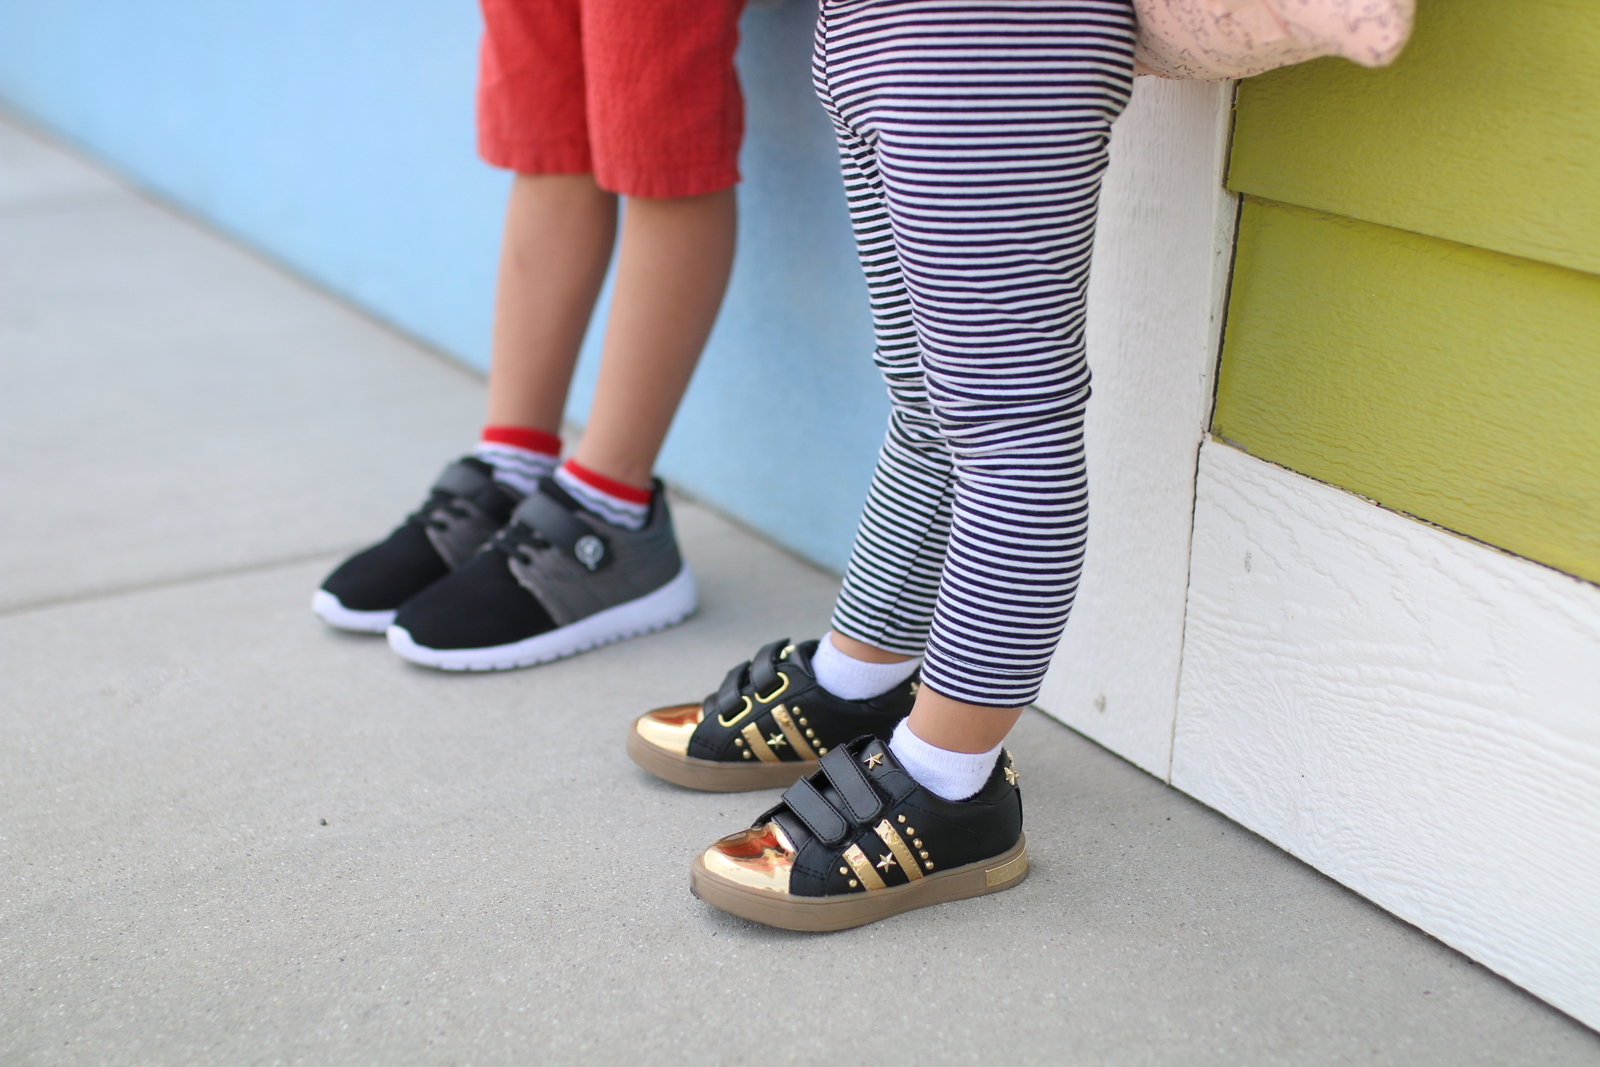 Back To School Must Have Shoes From KidsShoes.Com by Utah fashion blogger SandyALaMode